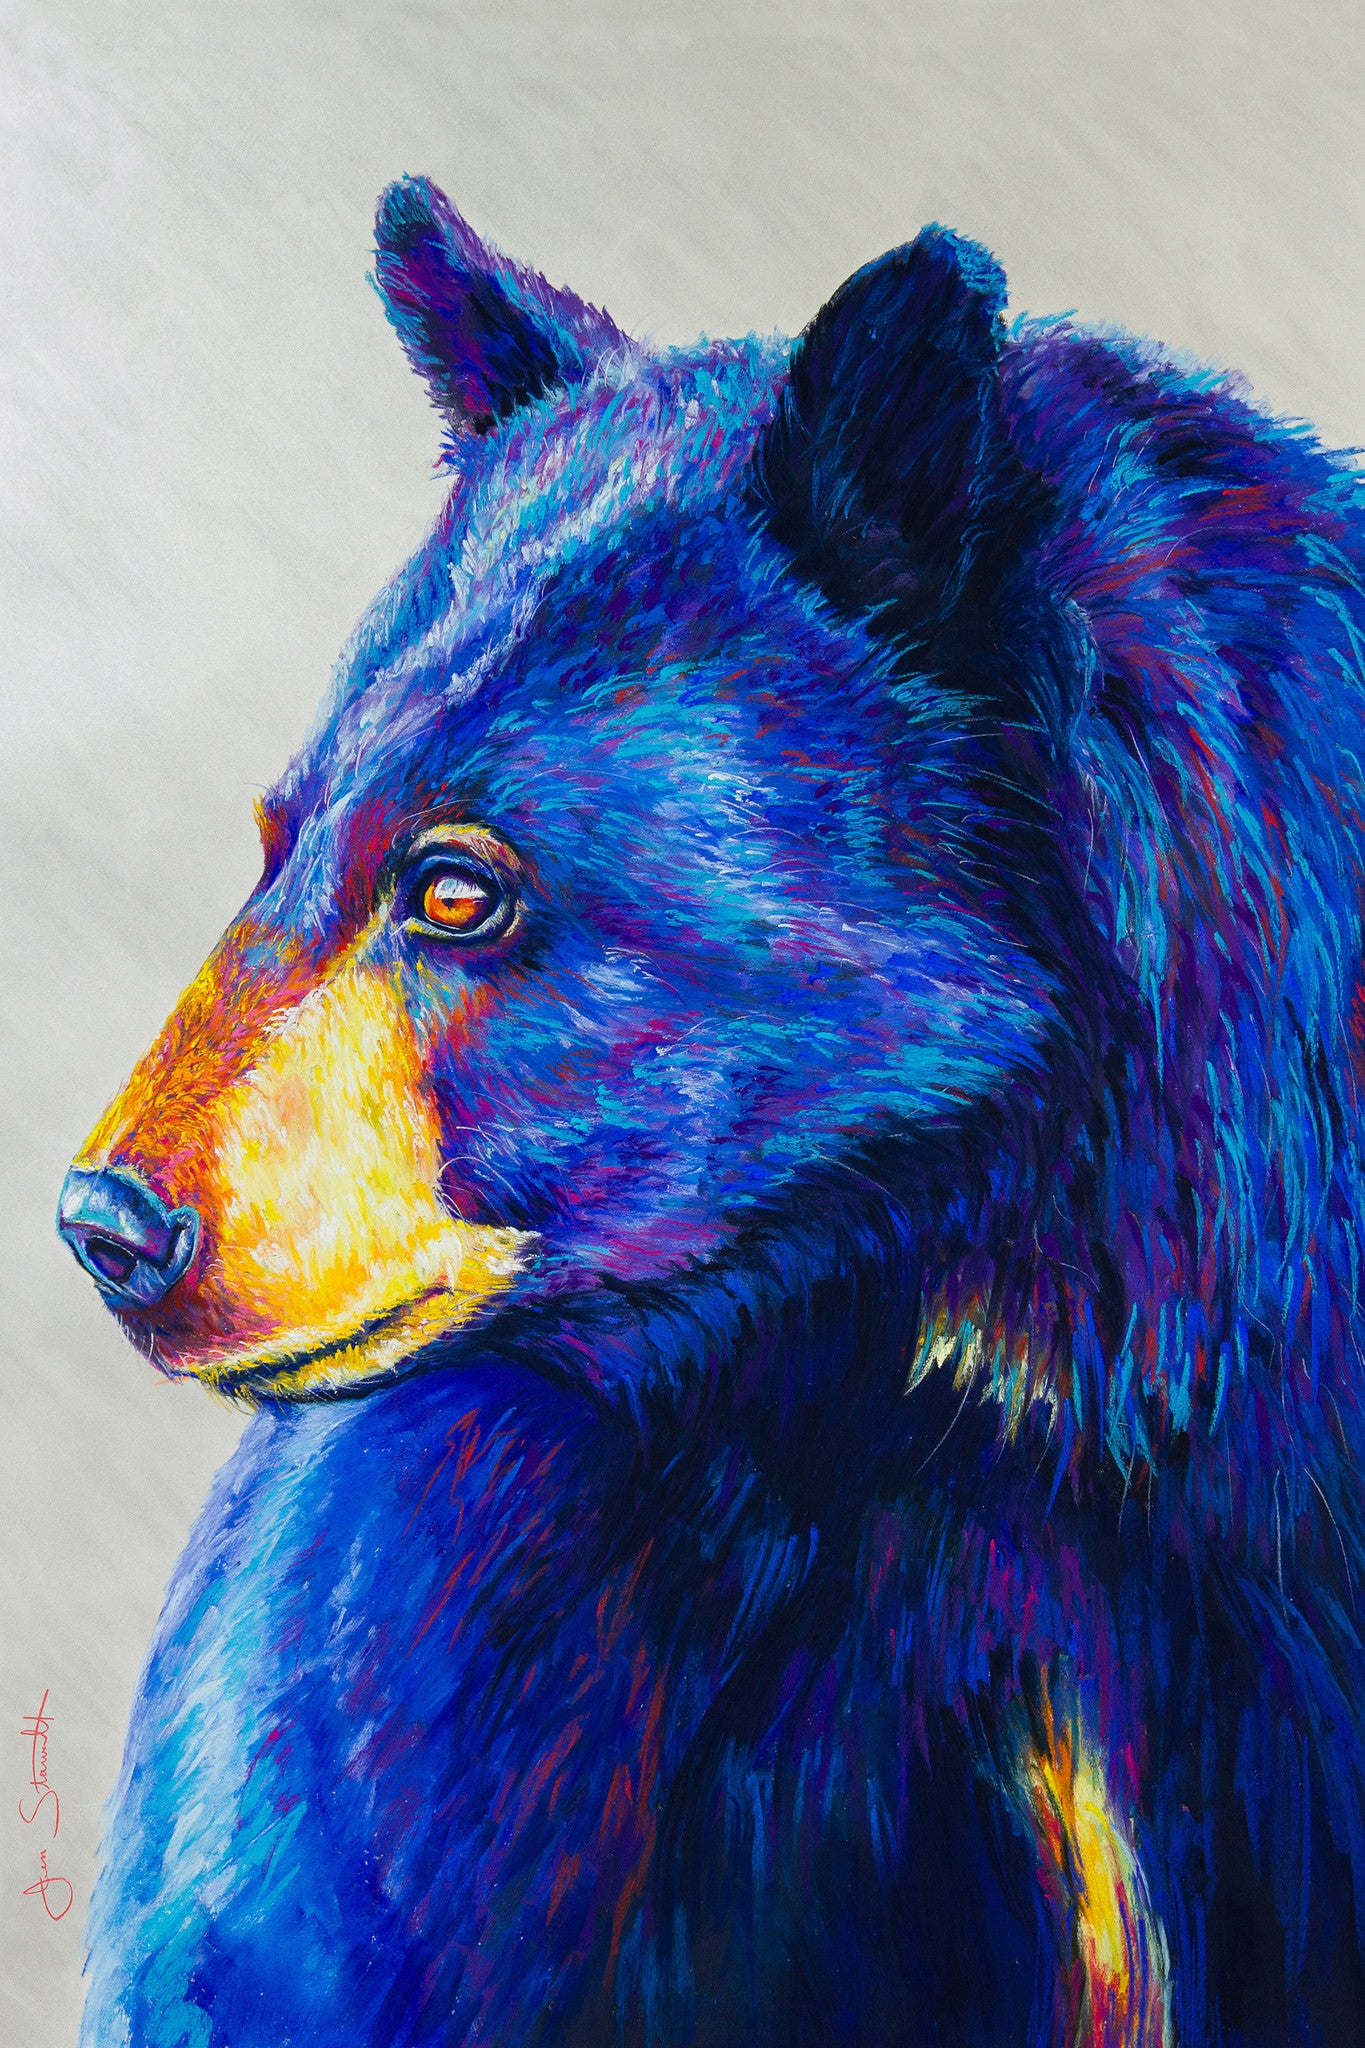 Time-lapse video of "Guardian Mother" Black Bear painting for Art Spark Auction